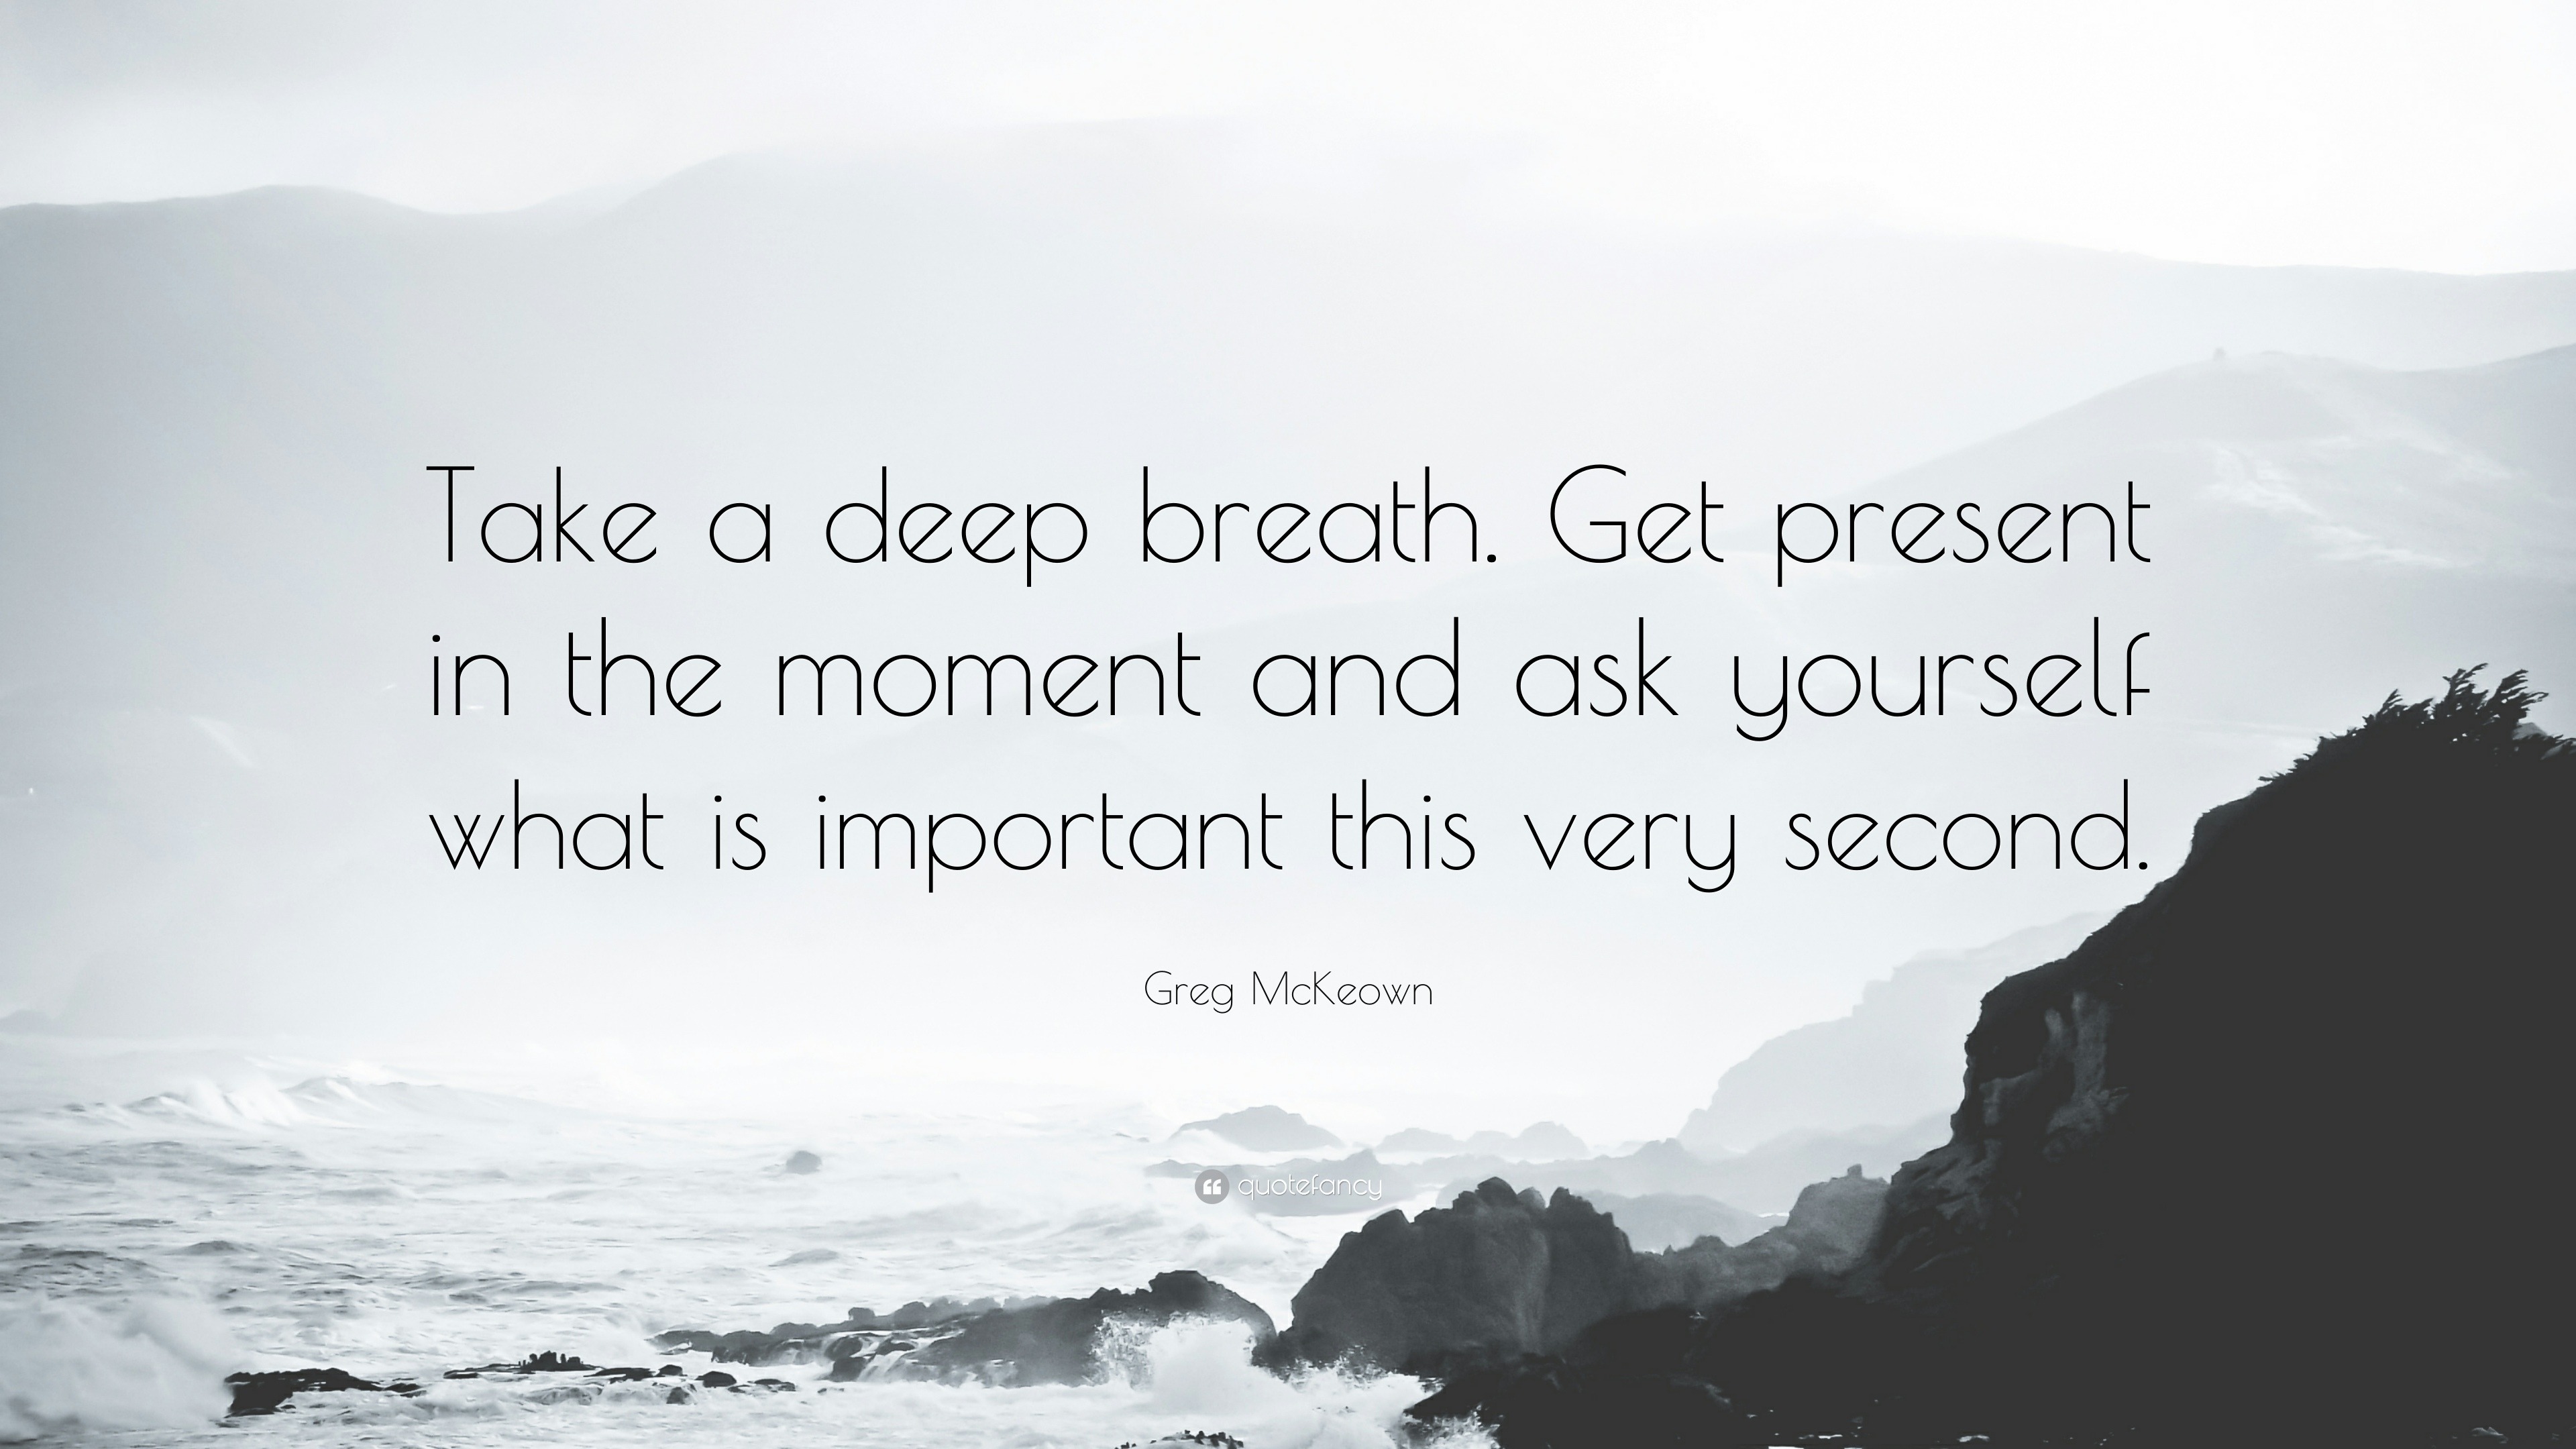 Greg Mckeown Quote: “Take A Deep Breath. Get Present In The Moment And Ask Yourself What